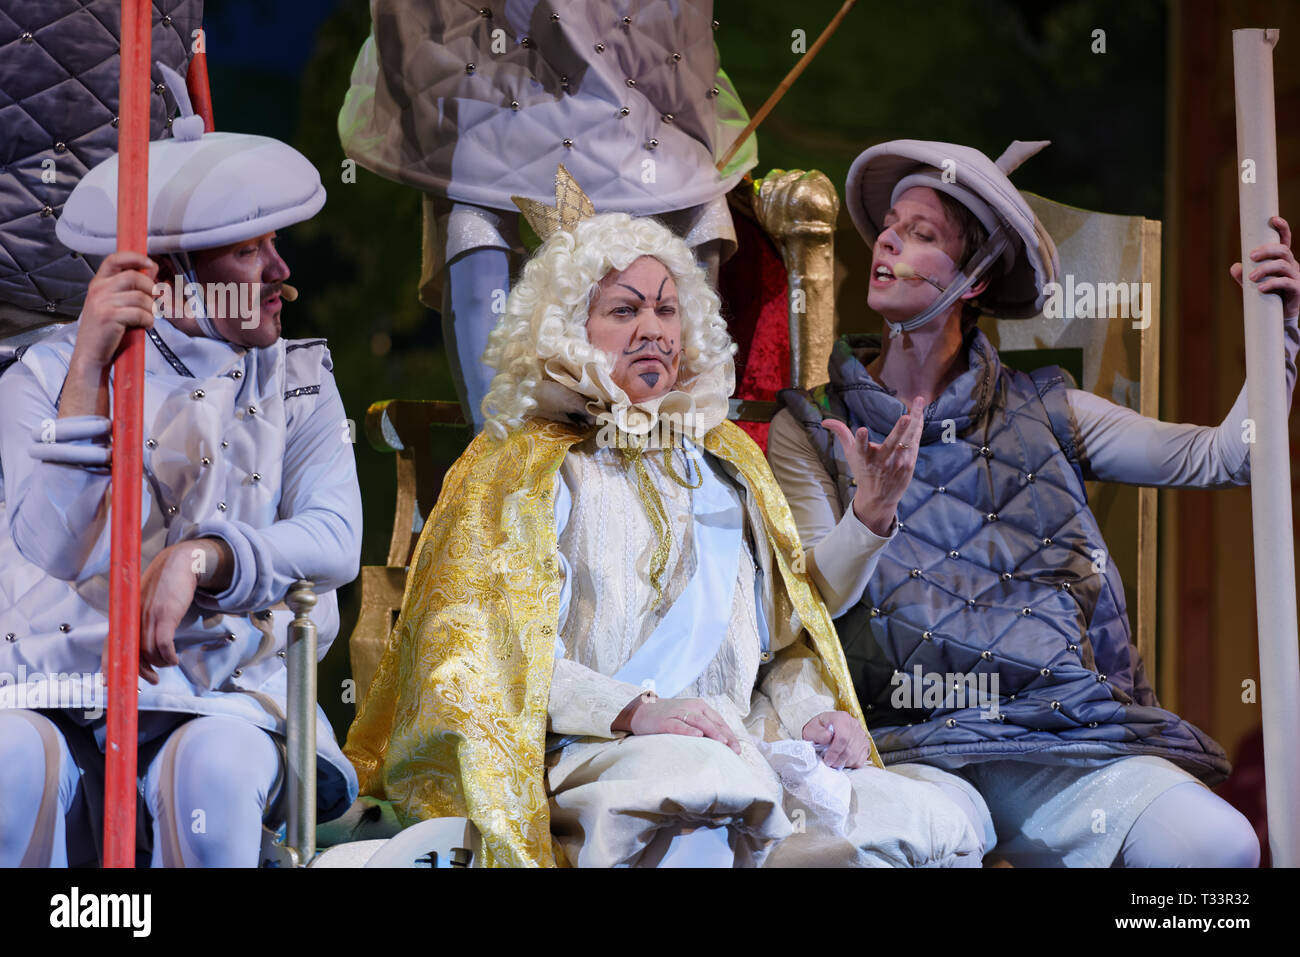 St. Petersburg, Russia - March 25, 2019: Oleg Kulikovich (center) as King in the musical Town Musicians of Bremen during its press preview in Saint-Pe Stock Photo